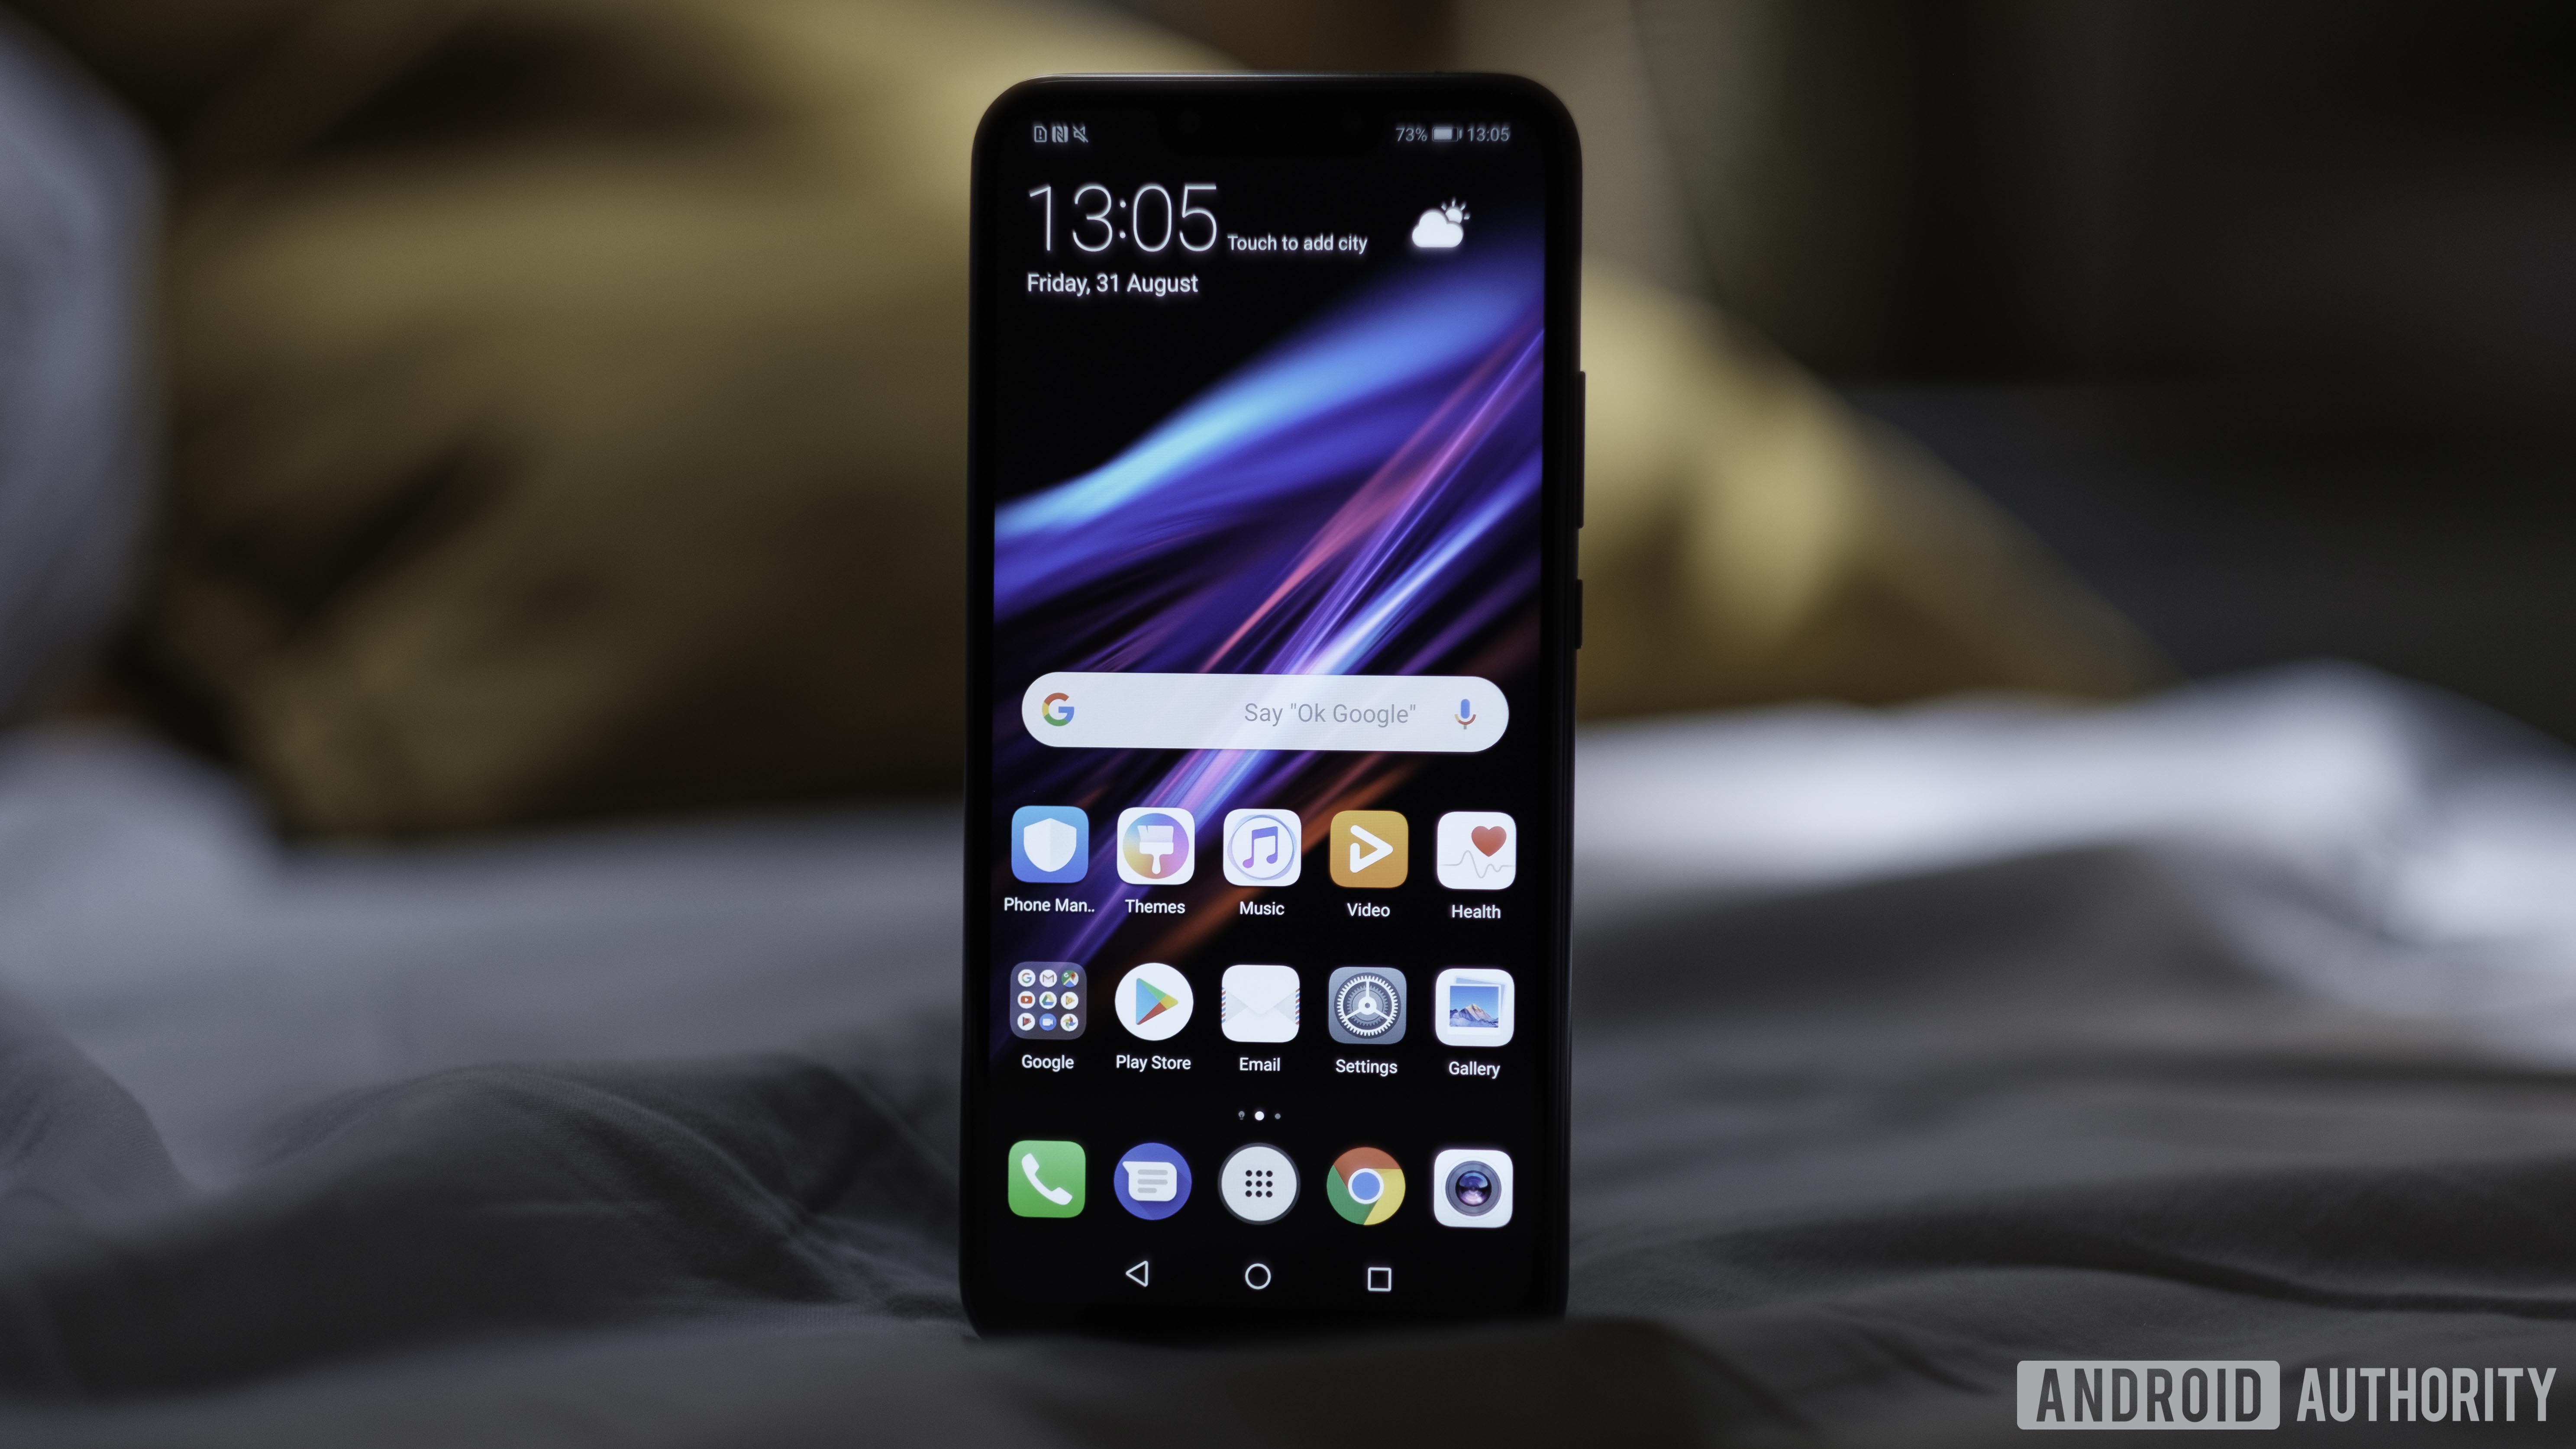 They are Exemption fuse Huawei Mate 20 Lite review: Not so smart - Android Authority